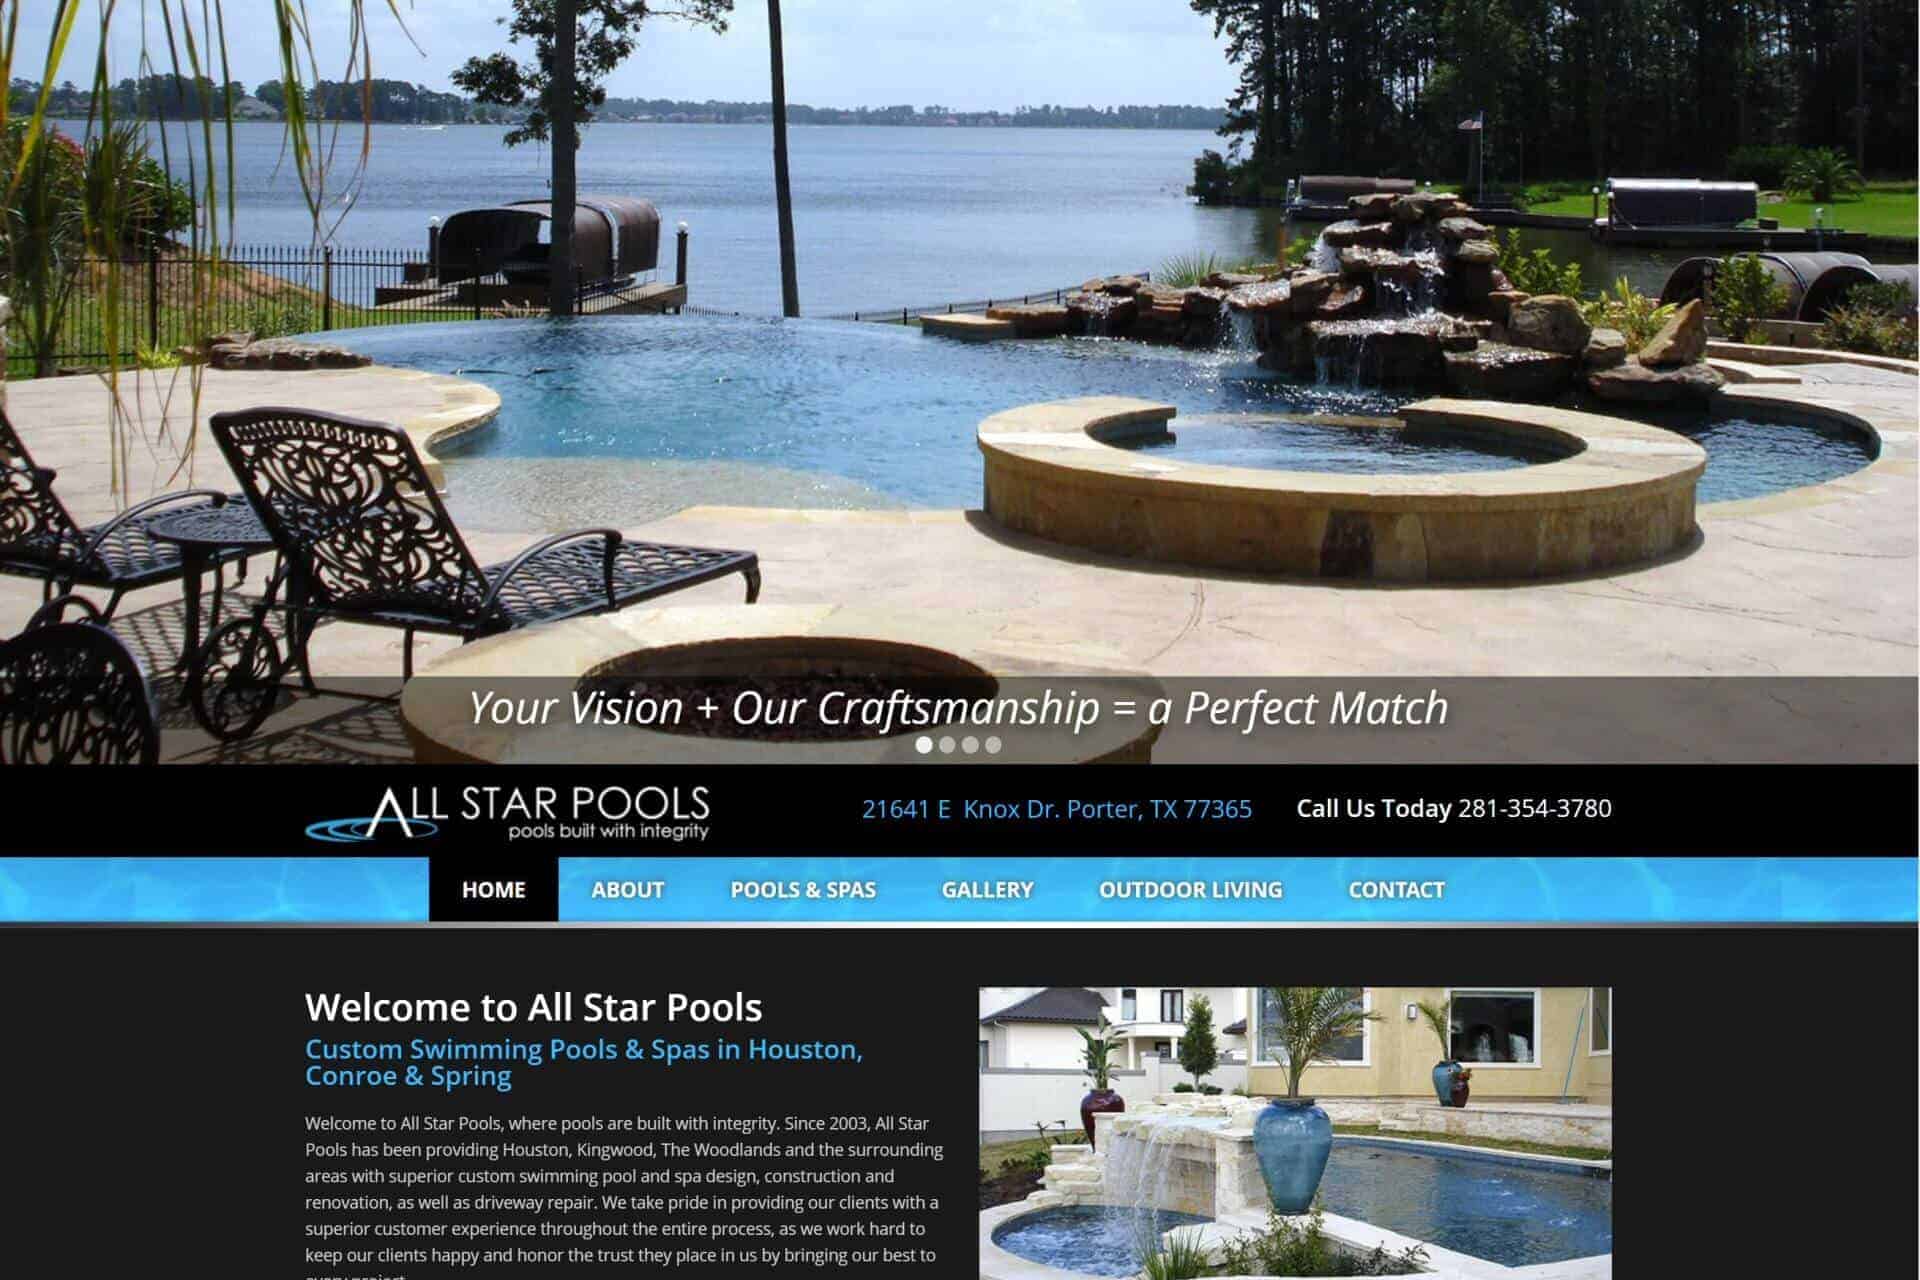 All Star Pools by The Woodlands VIP Limousine Service